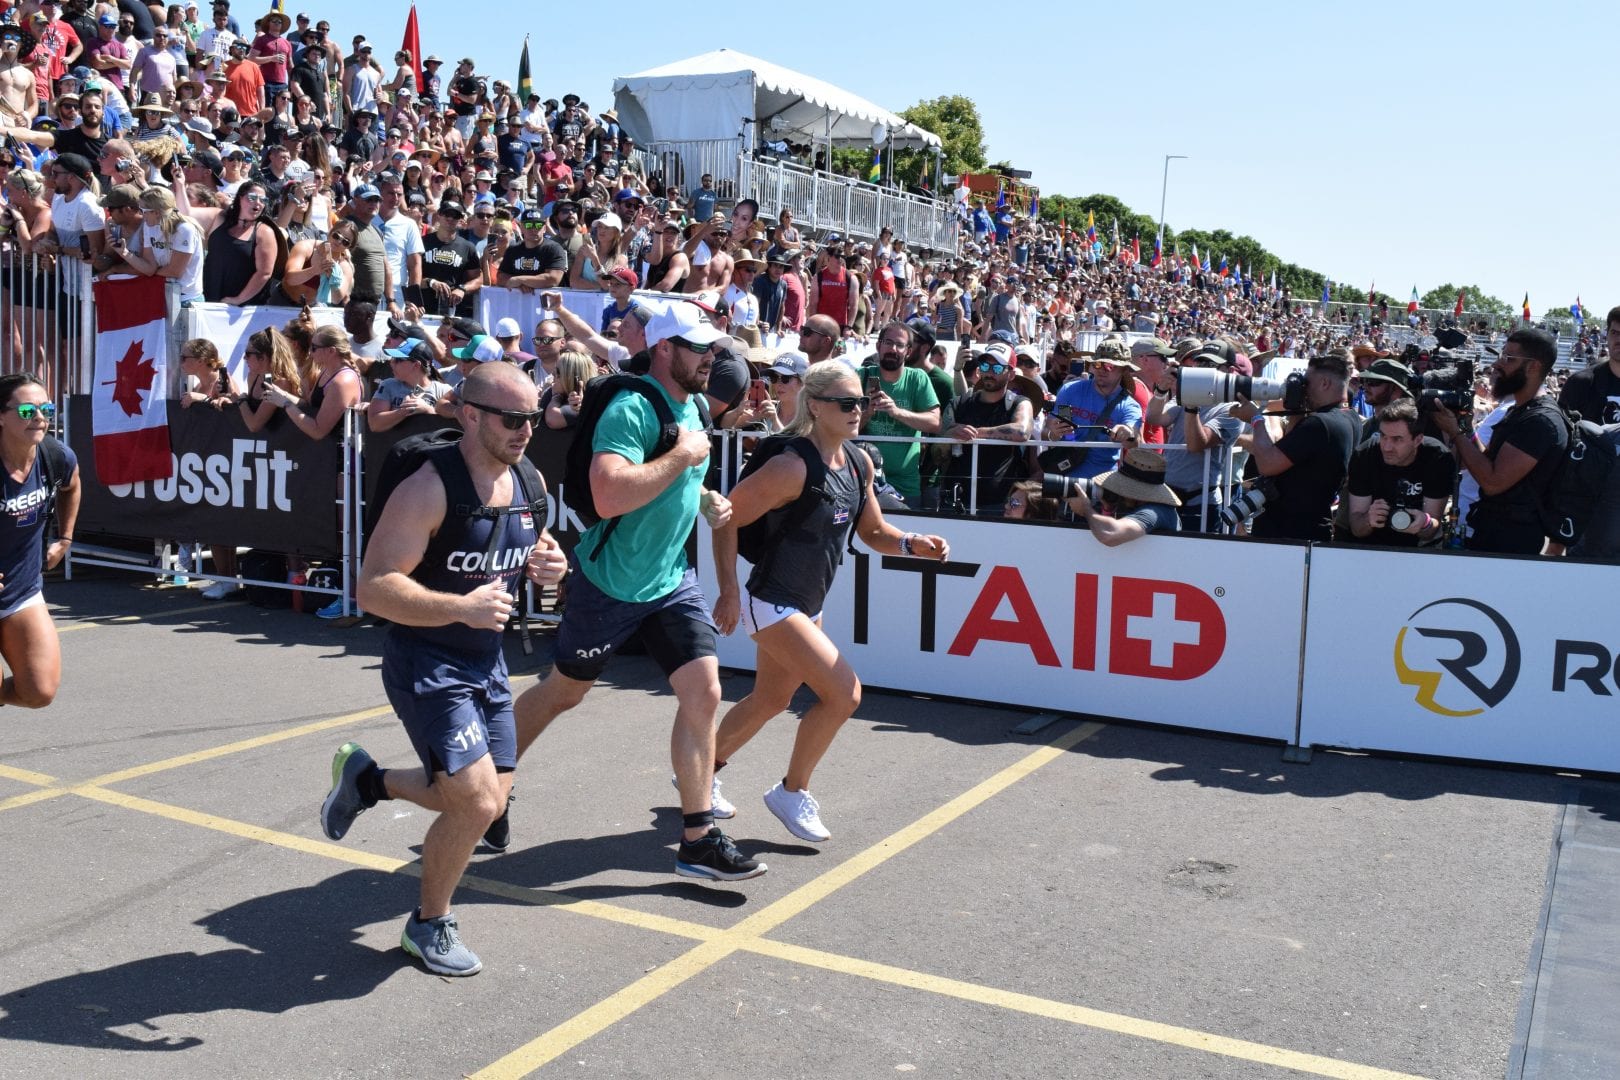 Sean Sweeney, the CrossFit Cowboy of CrossFit Powerstroke, completes the Ruck Run event at the 2019 CrossFit Games